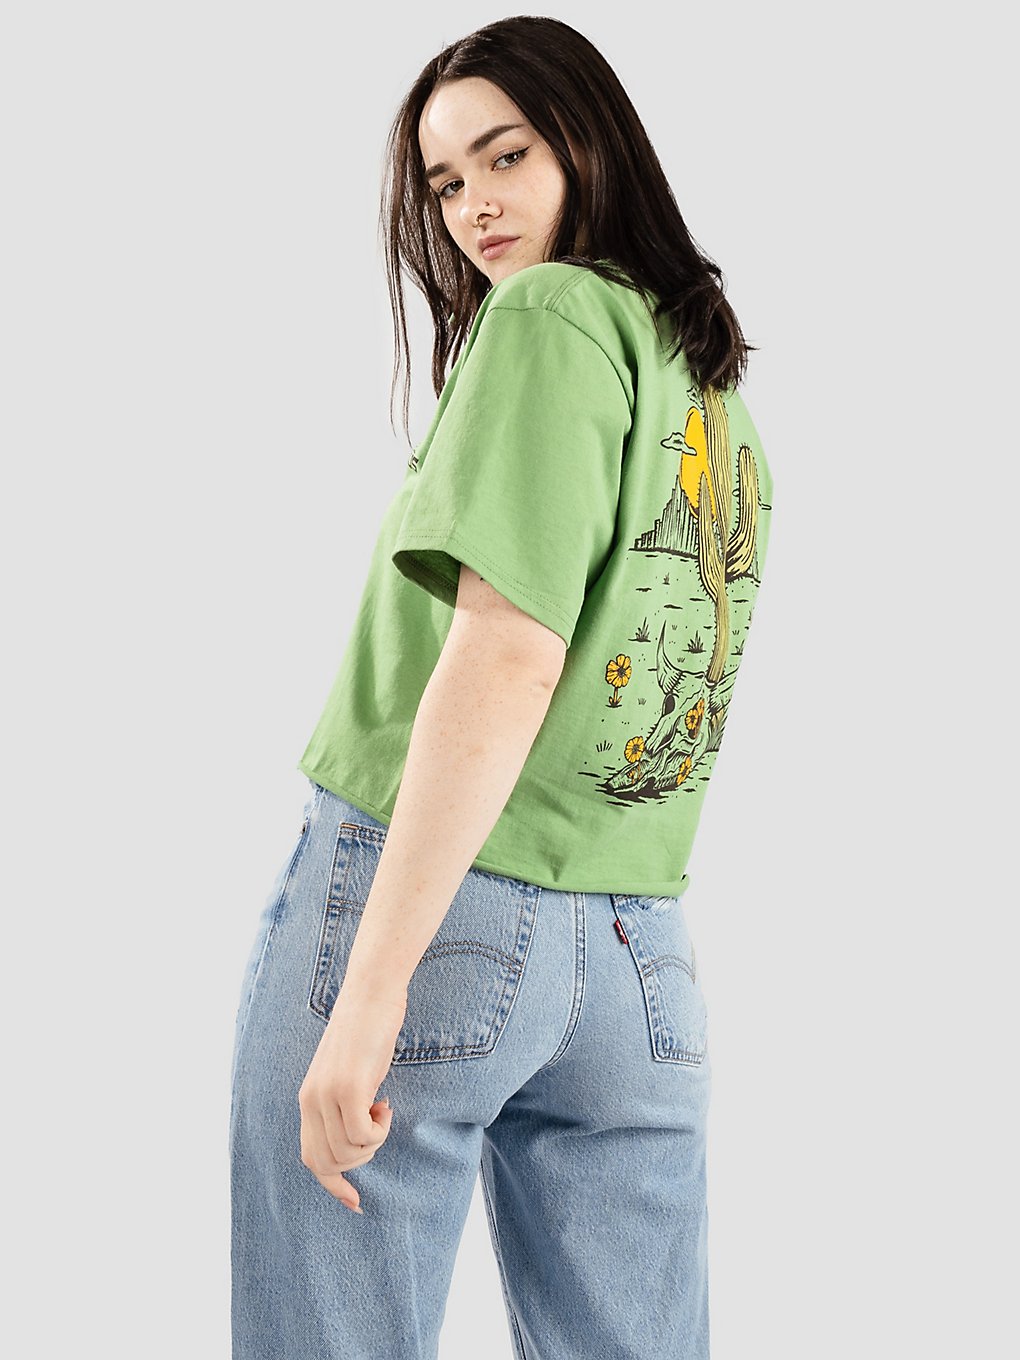 Dravus Wild Winds Dill Pickle Cropped T-Shirt dill green kaufen